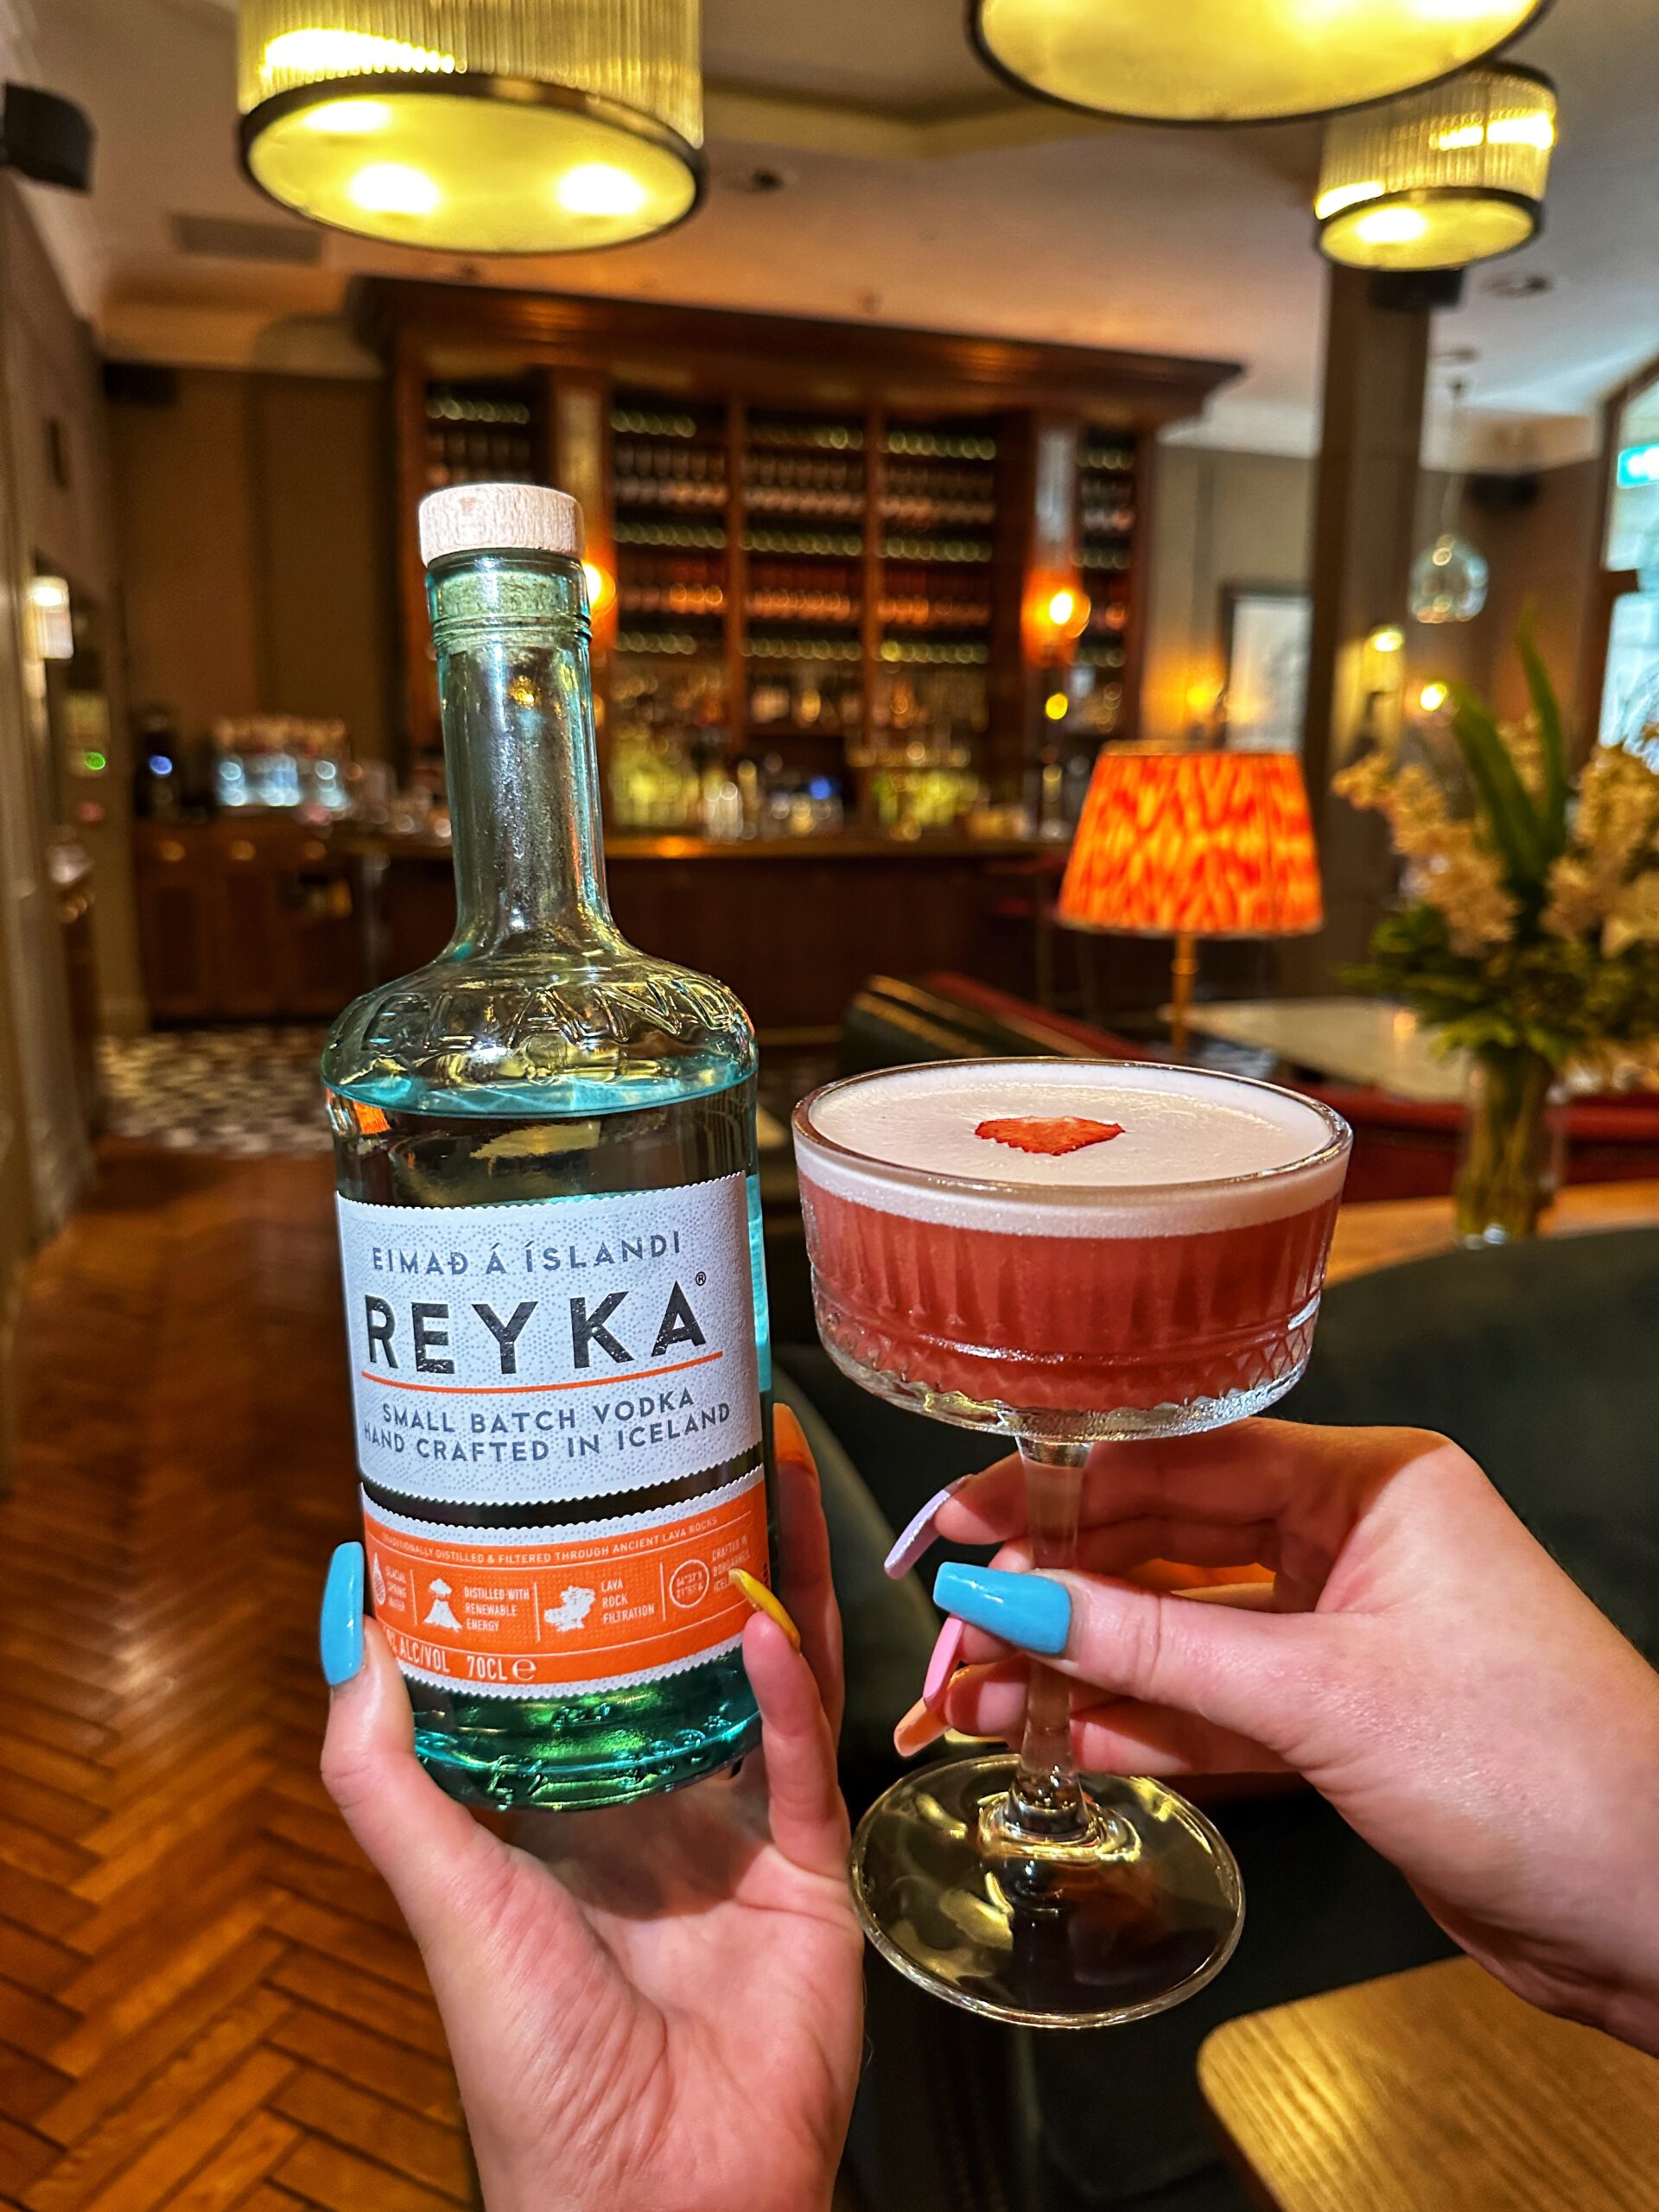 Where to find Reyka Vodka in Manchester - King Street Townhouse